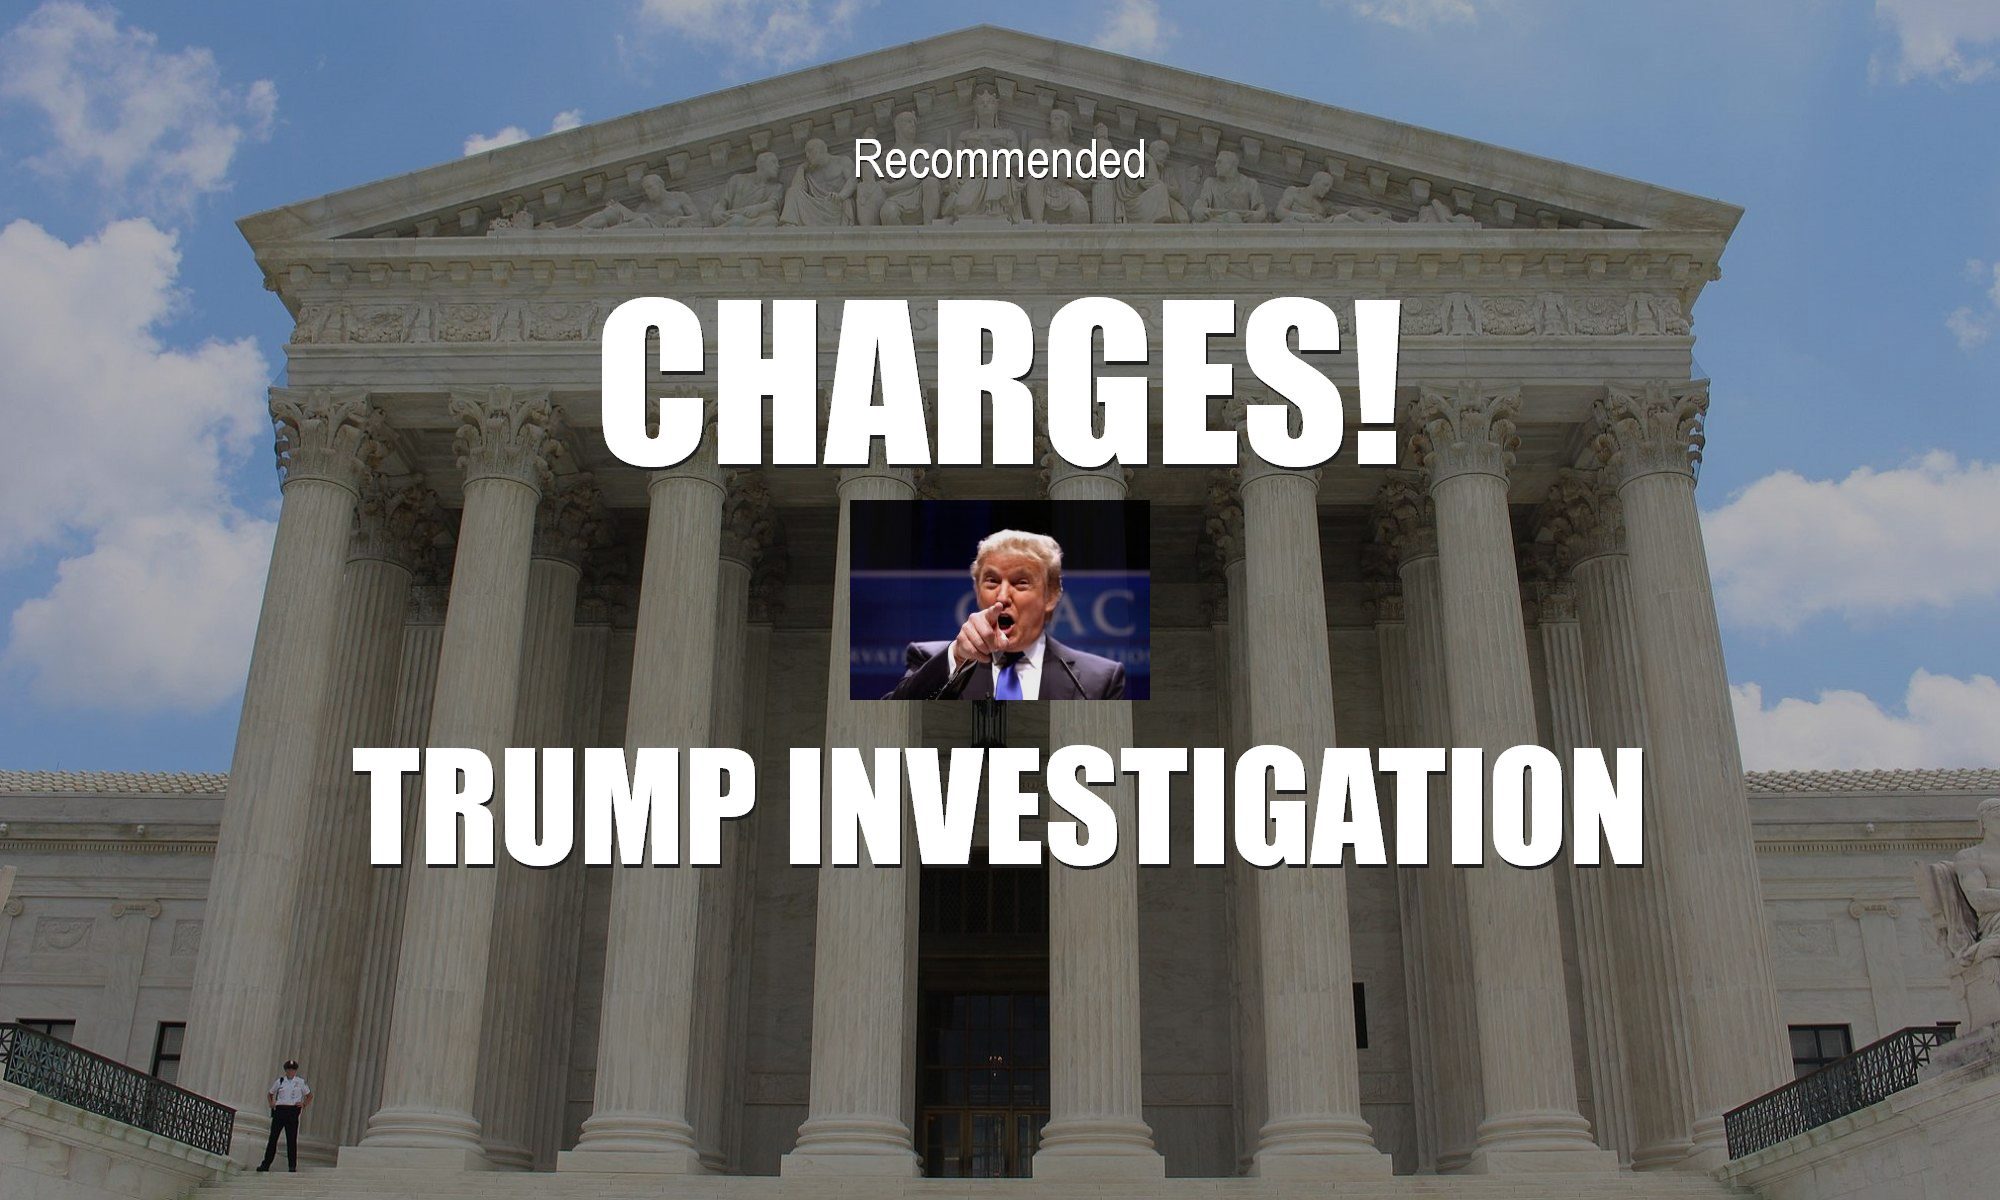 What charges against Trump has the January 6th Committee recommended to the DOJ?